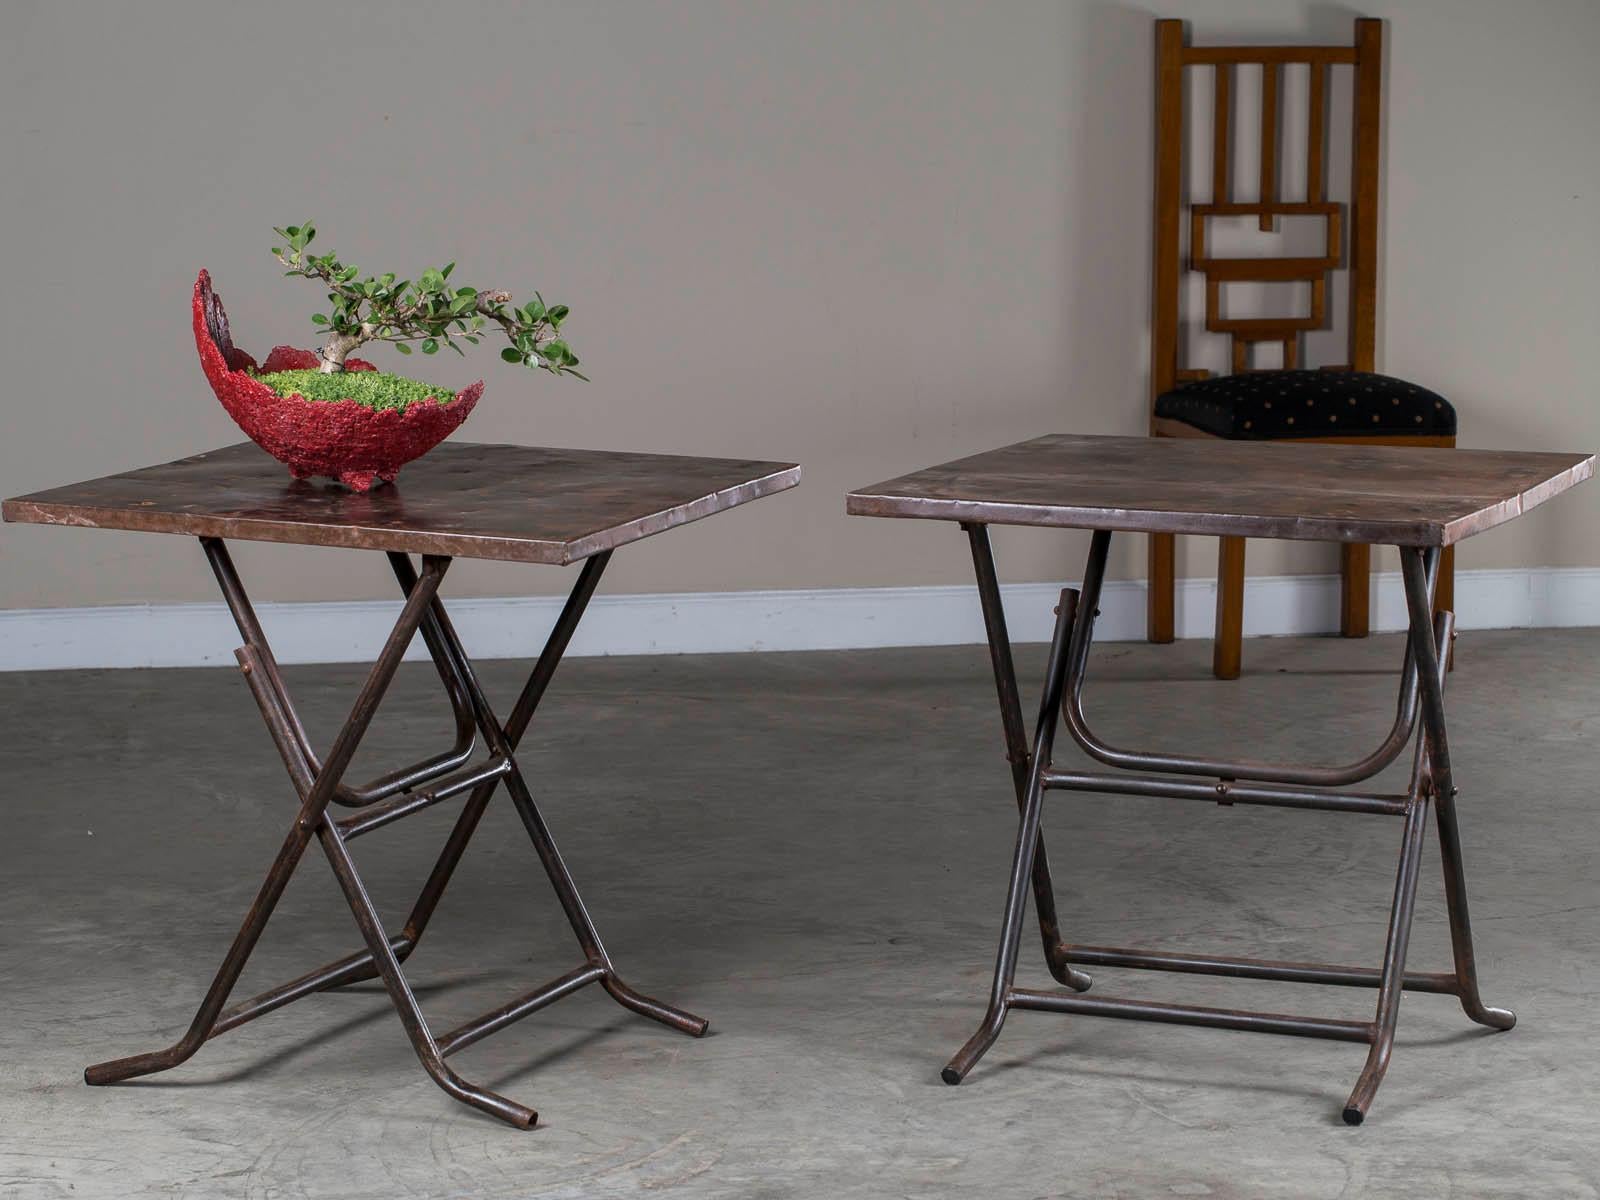 Industrial Pair of Square Metal Folding Tables Tubular Metal Legs Found in Asia